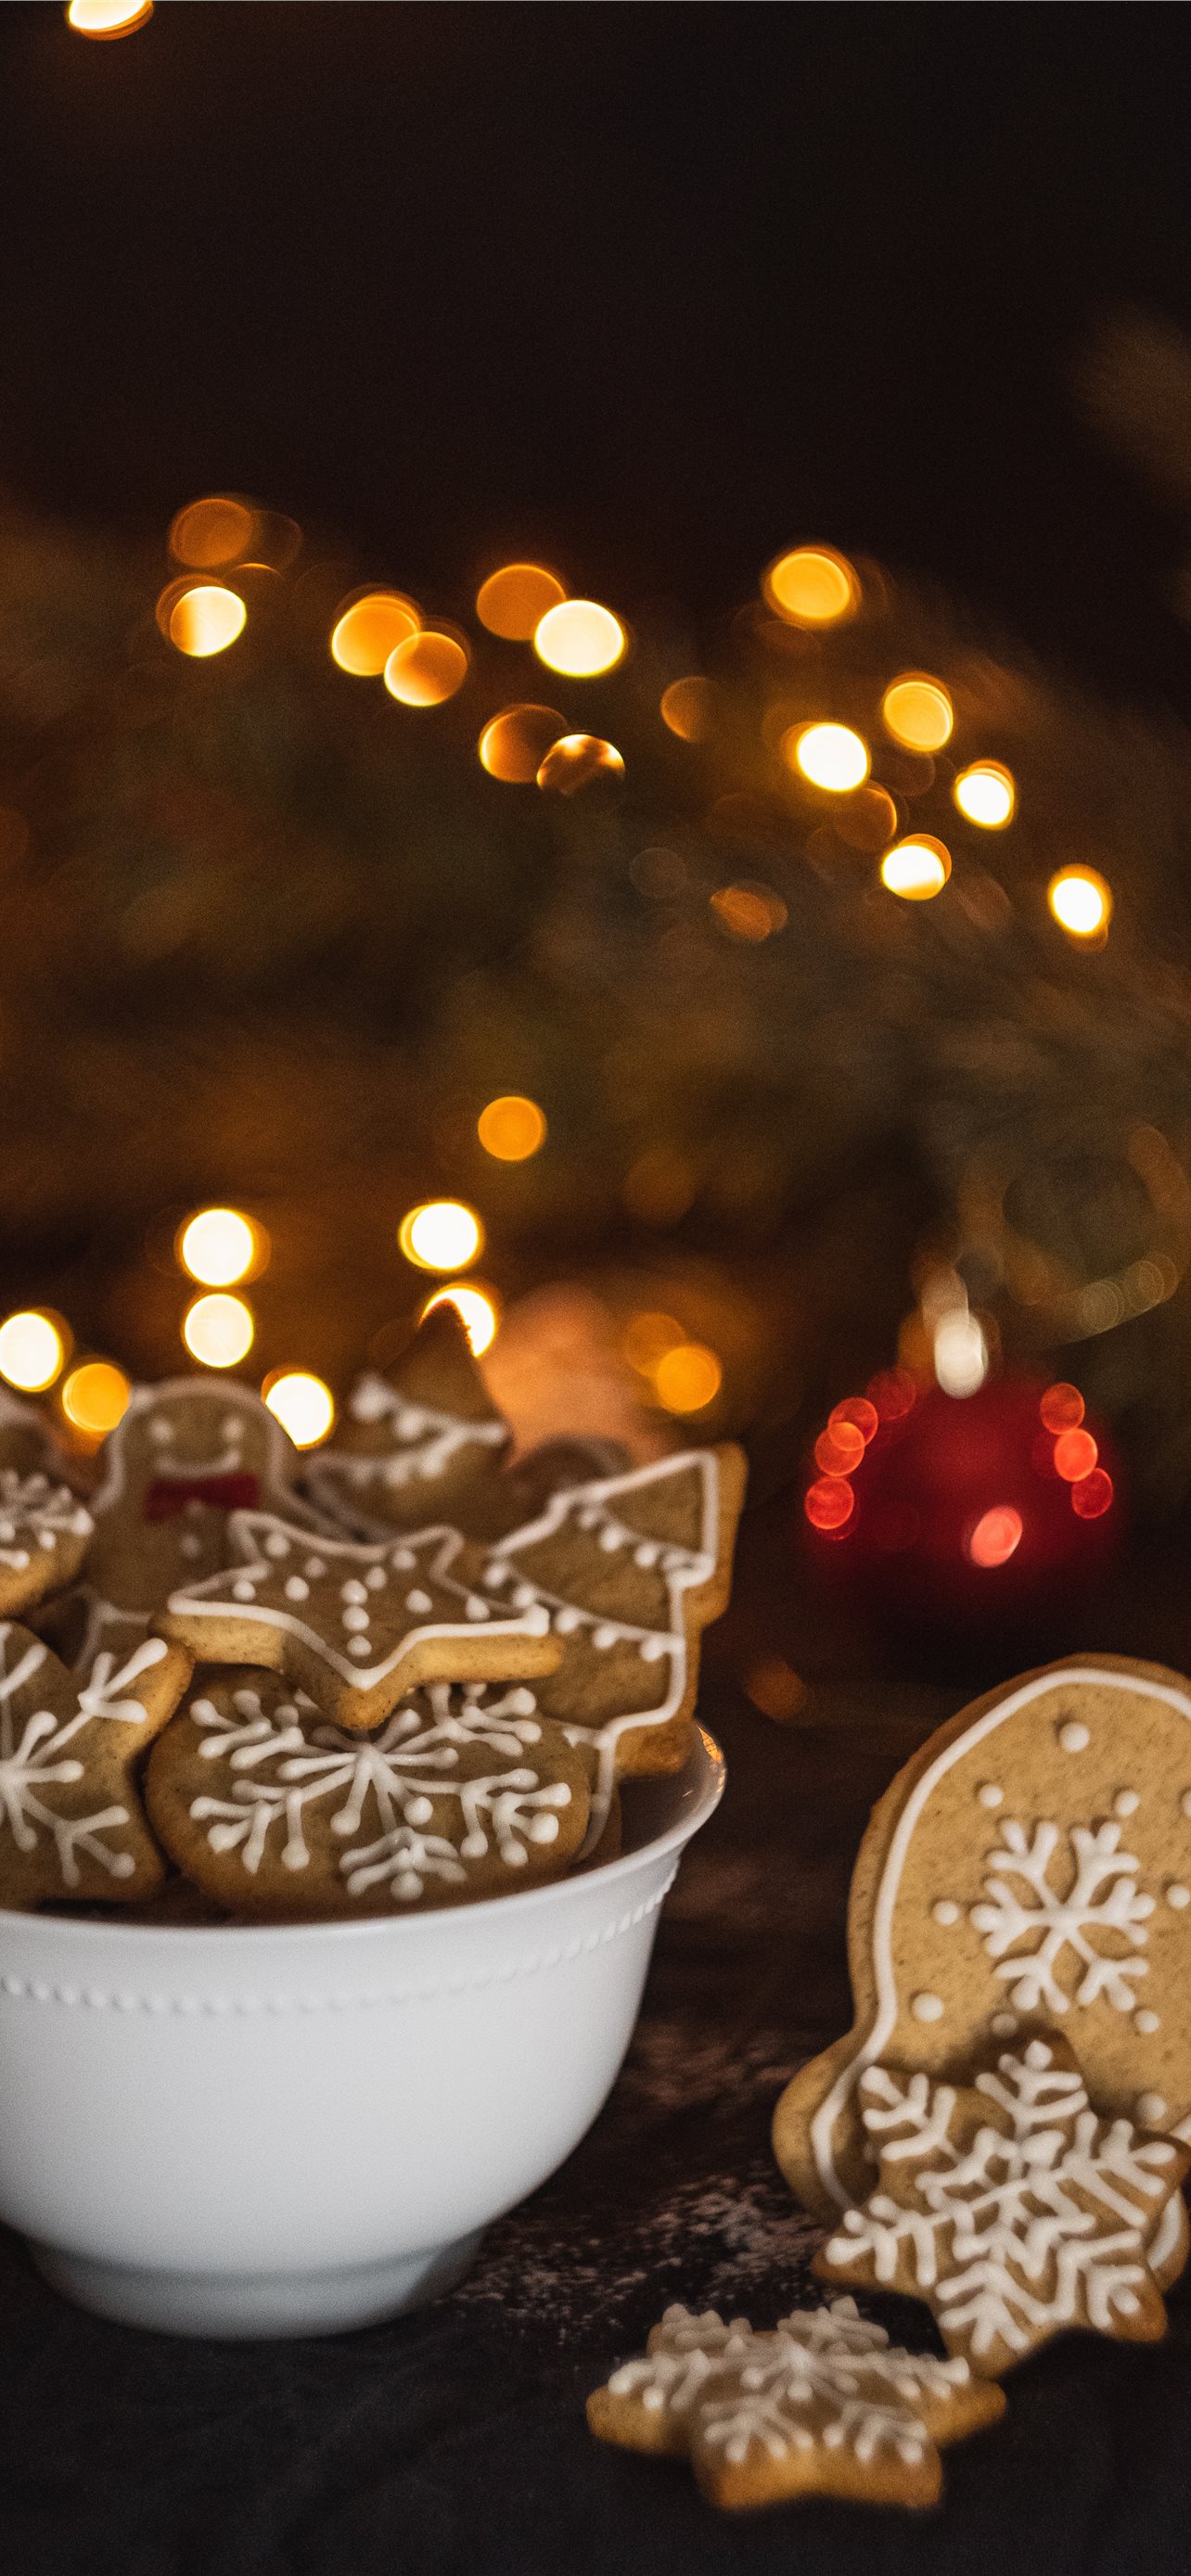 cookies in bowl near Christmas tree iPhone Wallpaper Free Download